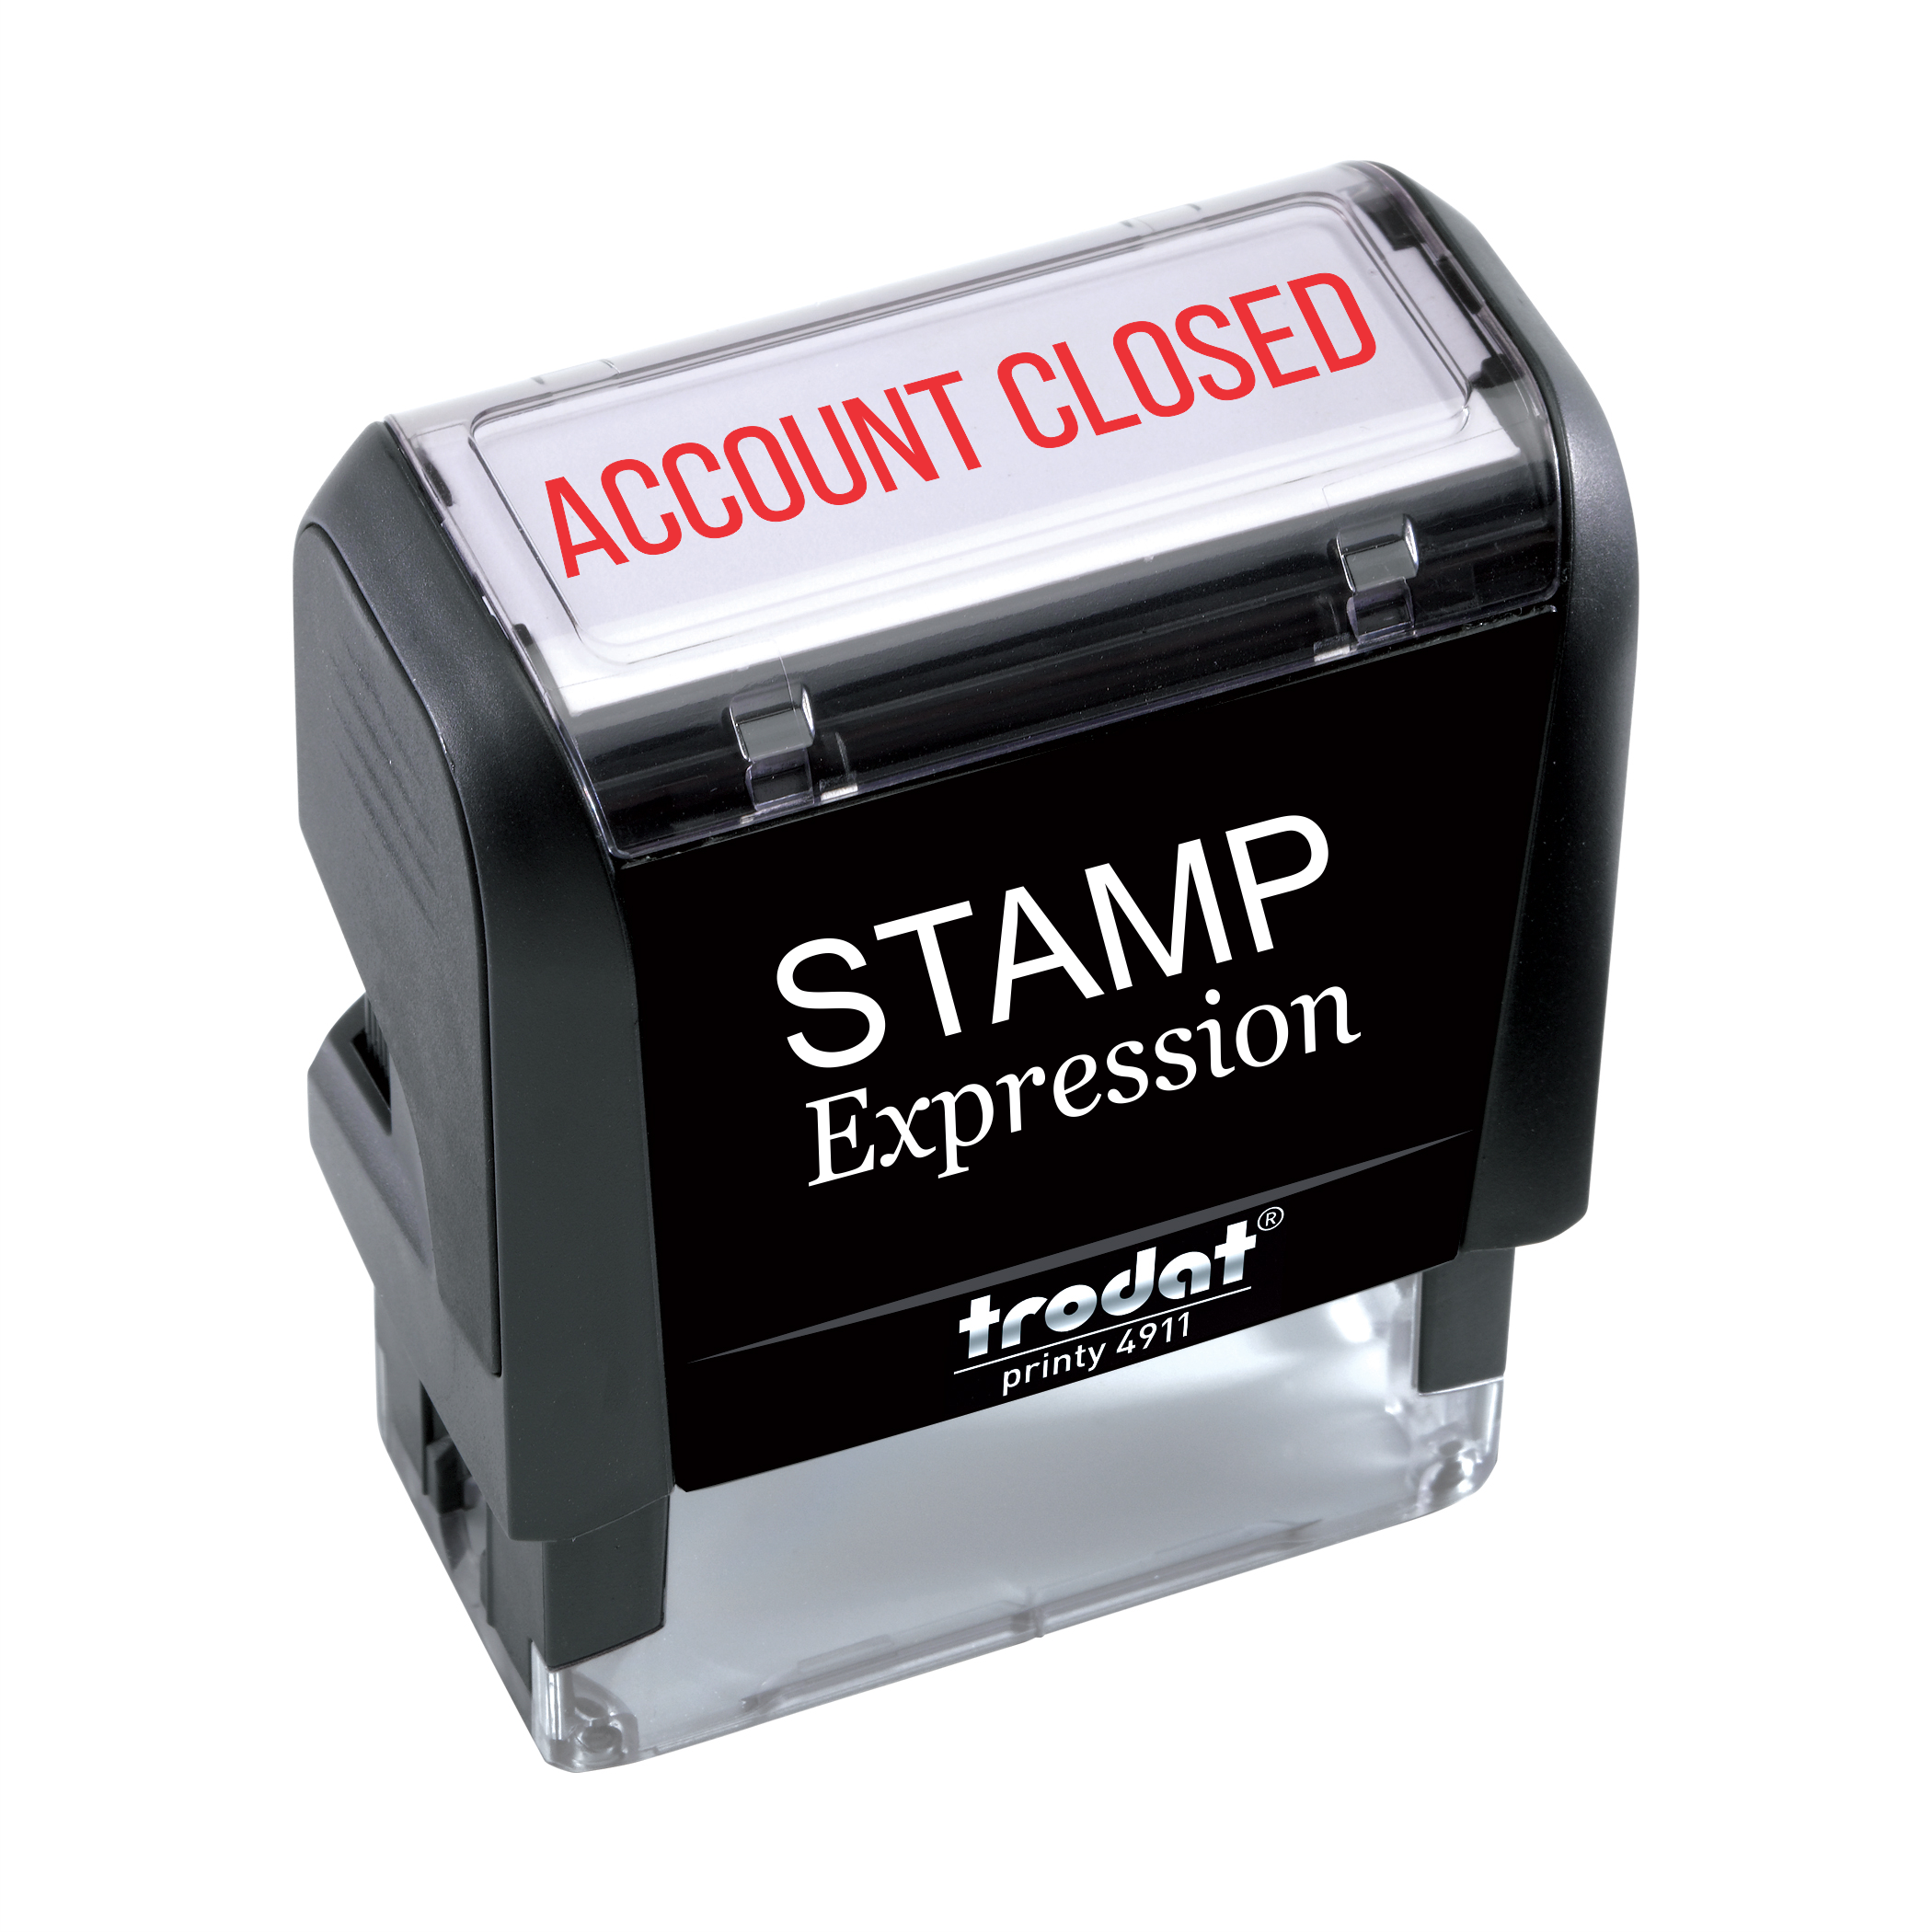 Account Closed Office Self Inking Rubber Stamp